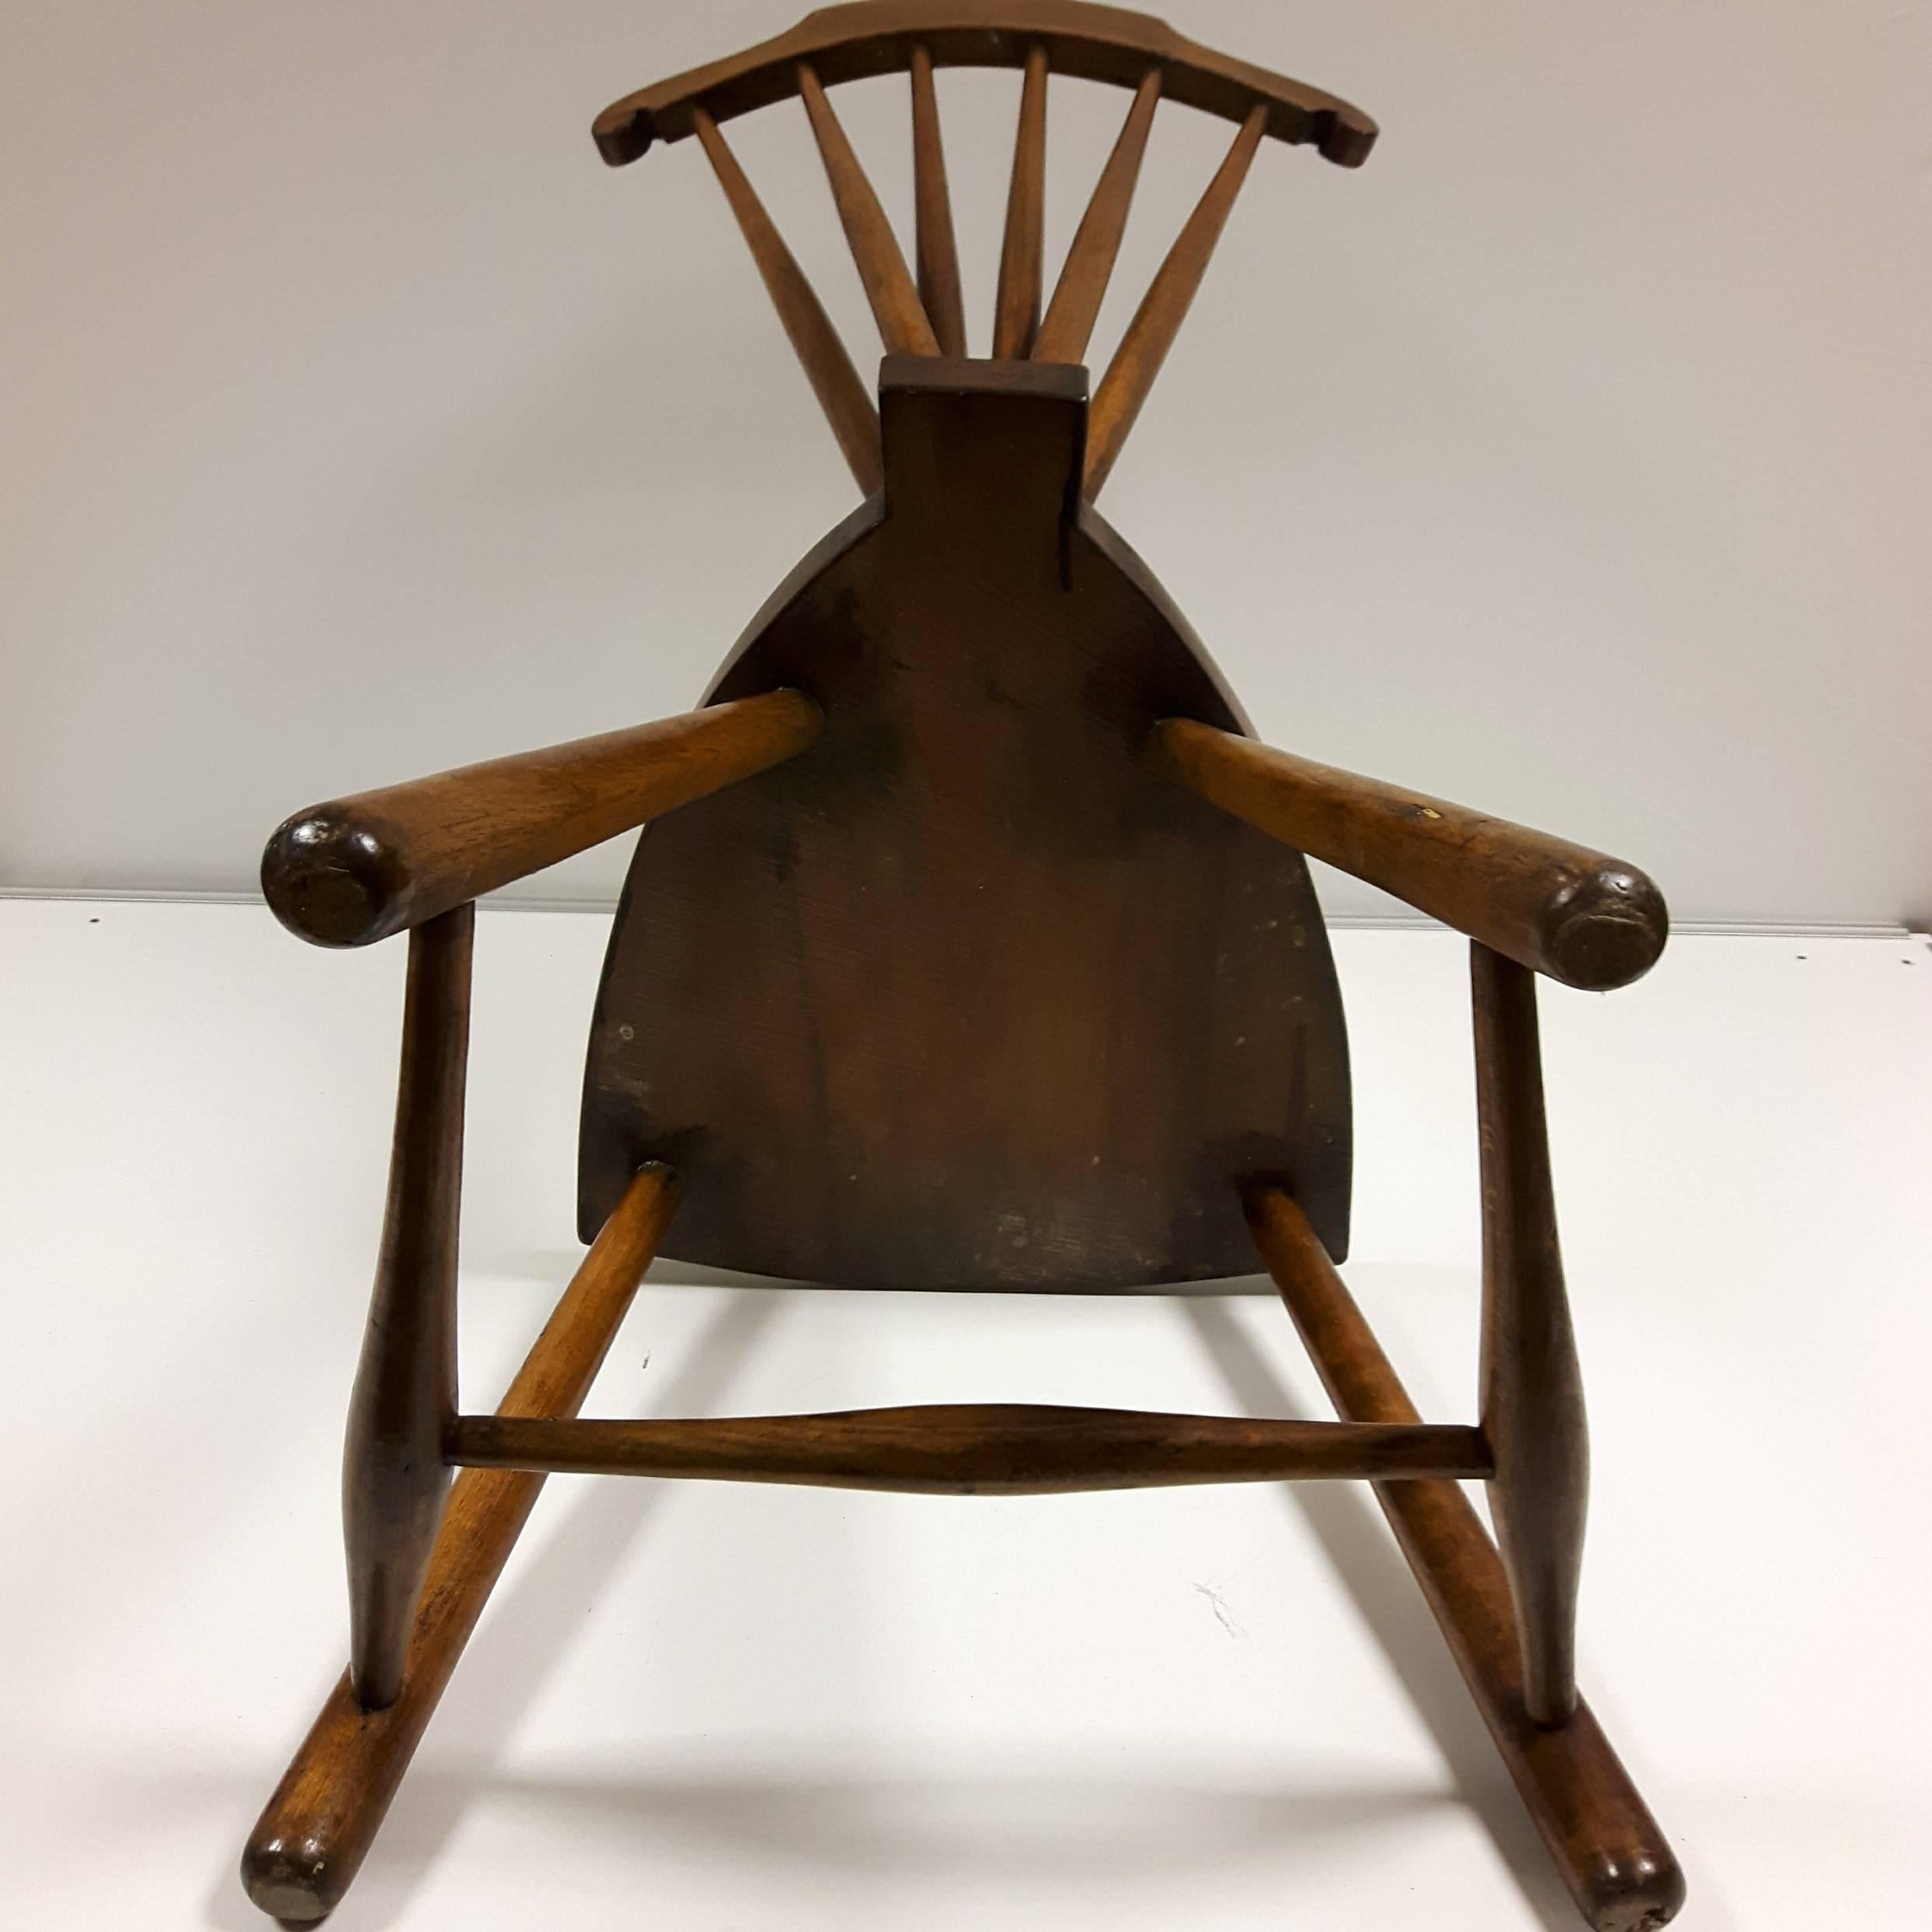 Gorgeous handmade solid wood antique children's chair. Excellent quality manufacture. Stamped E.G. on the back of the seat. A truly gorgeous, tactile, well proportioned little chair. It is adorable!

E.G. is believed to refer to Ebenezer Gomme,